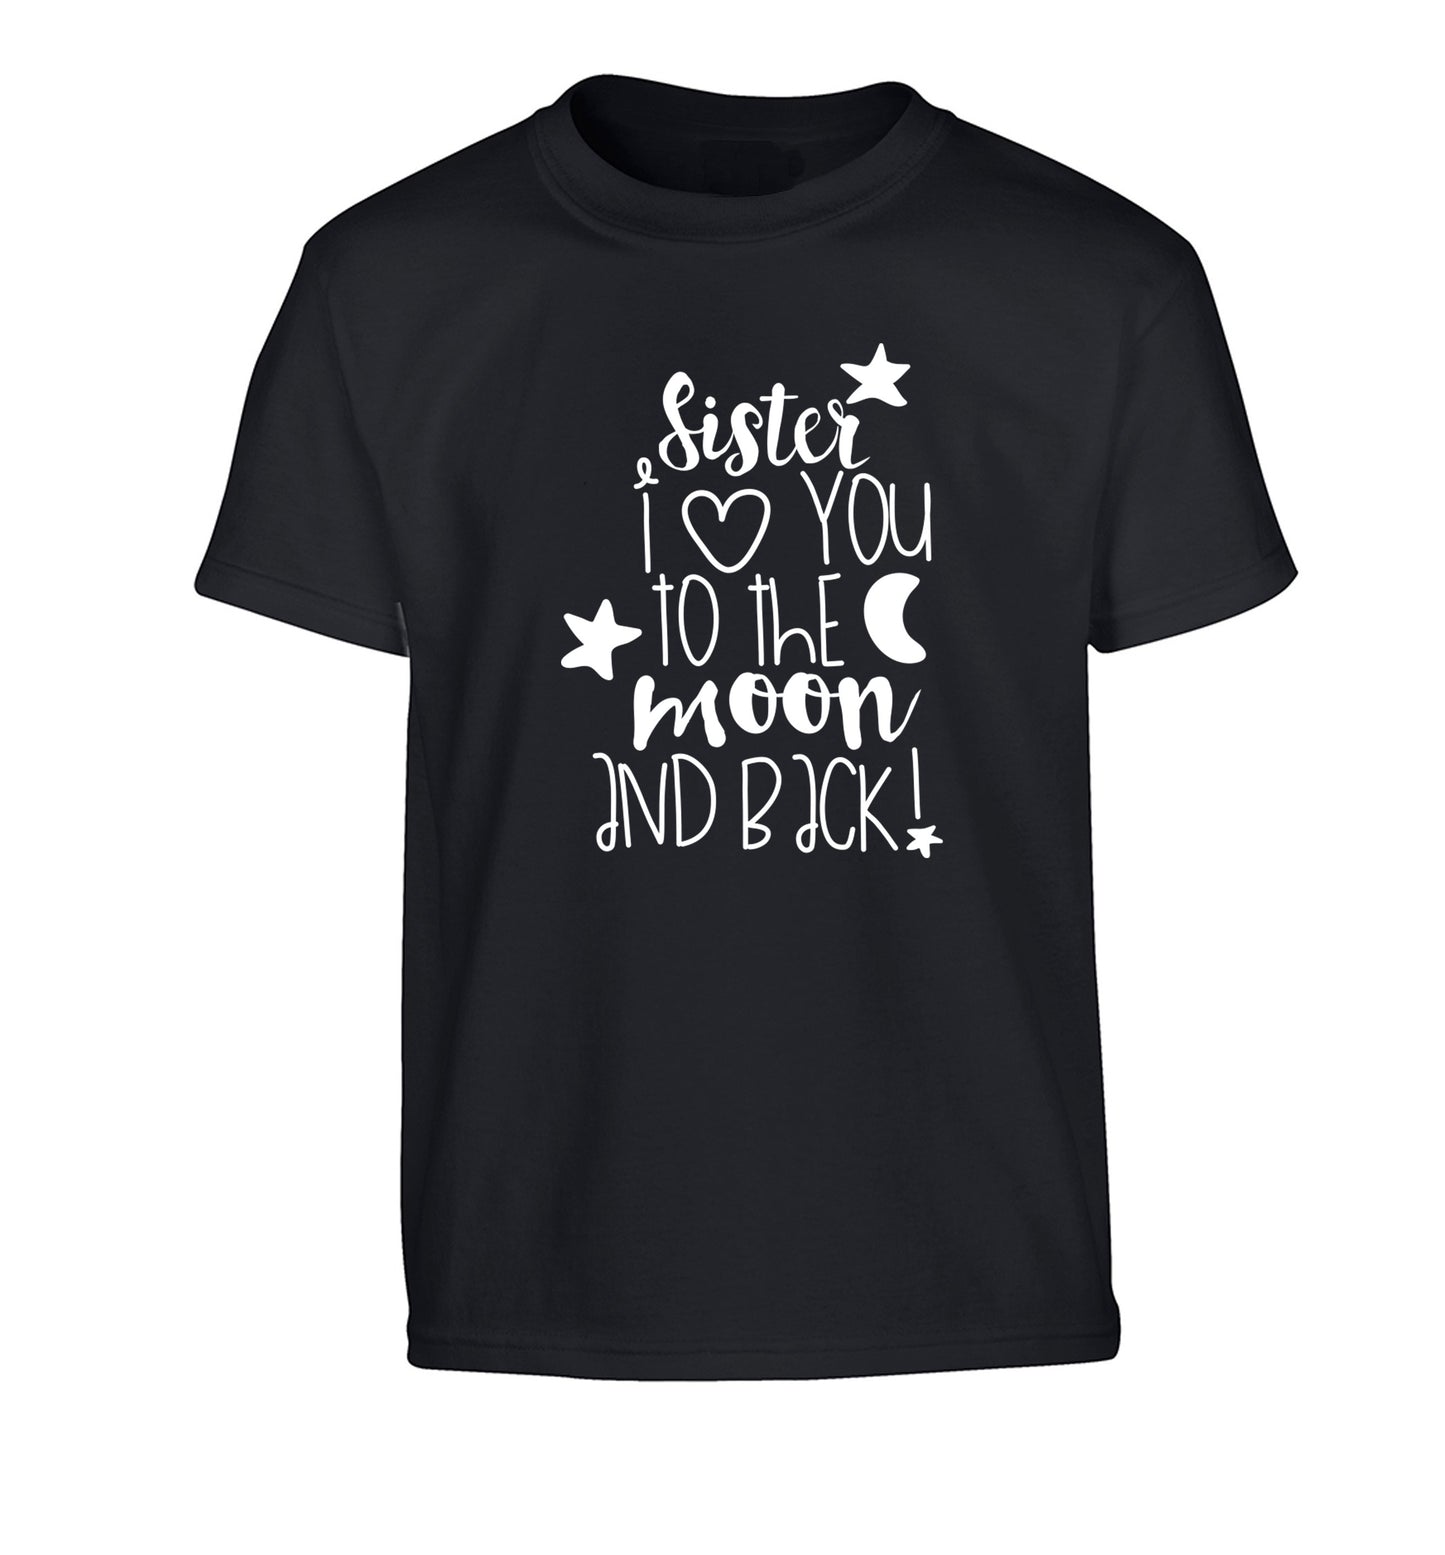 Sister I love you to the moon and back Children's black Tshirt 12-14 Years